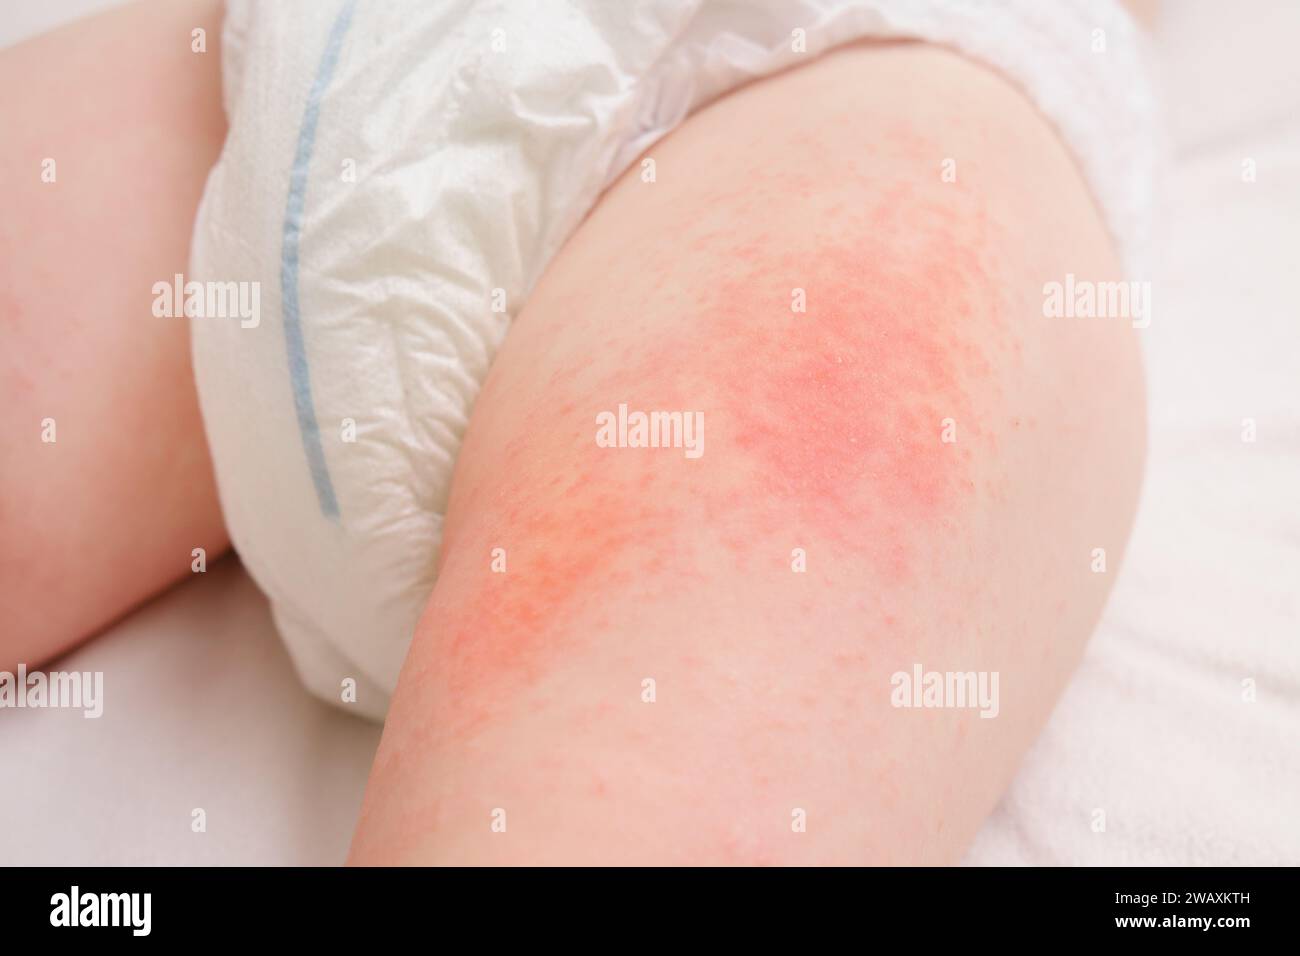 Allergic rash on the legs of the toddler baby boy. Red pimples from allergies on the child's body. Stock Photo